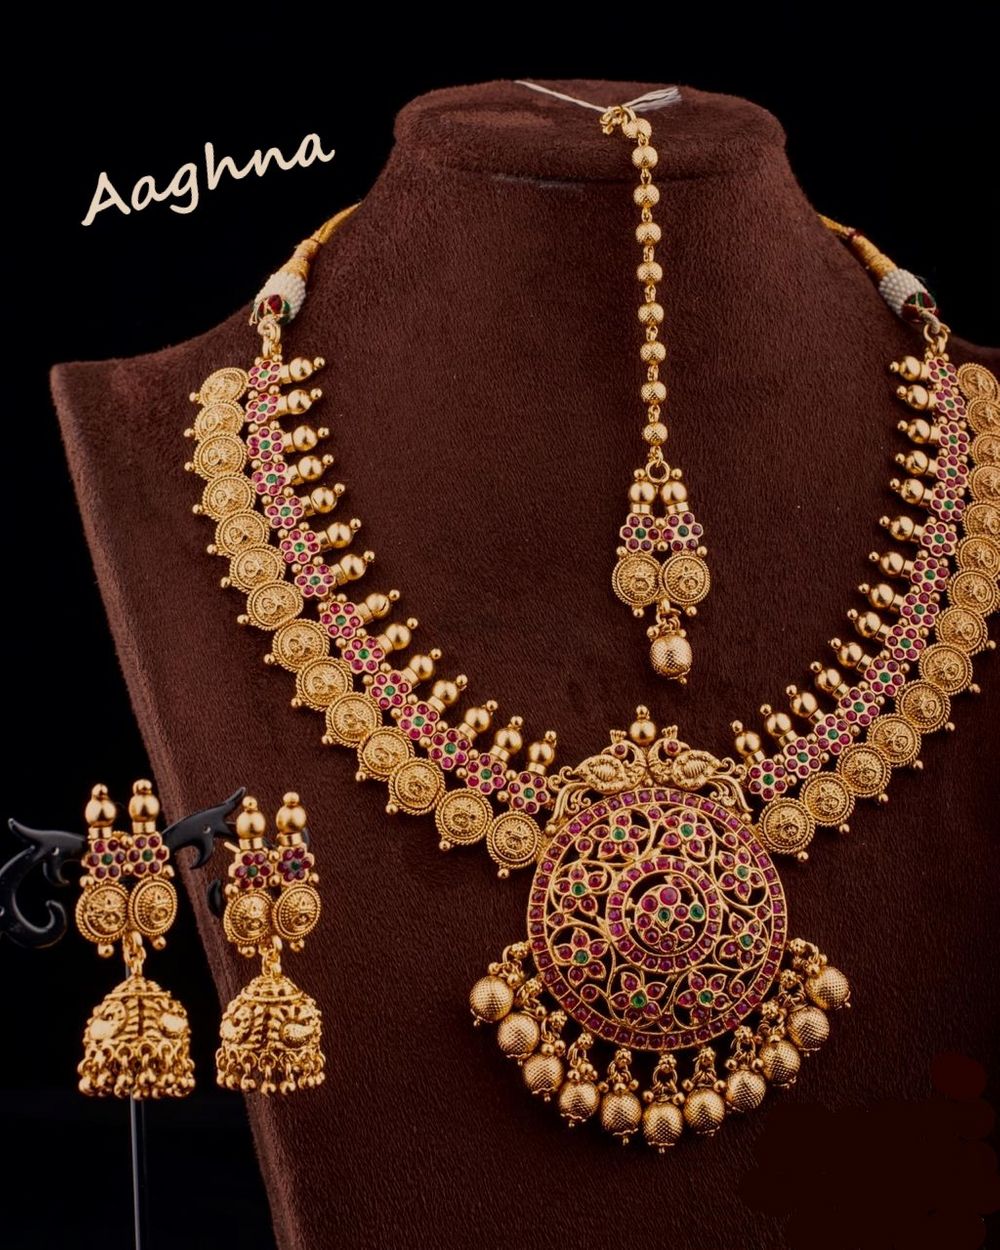 Photo By Aaghna Fashions - Jewellery